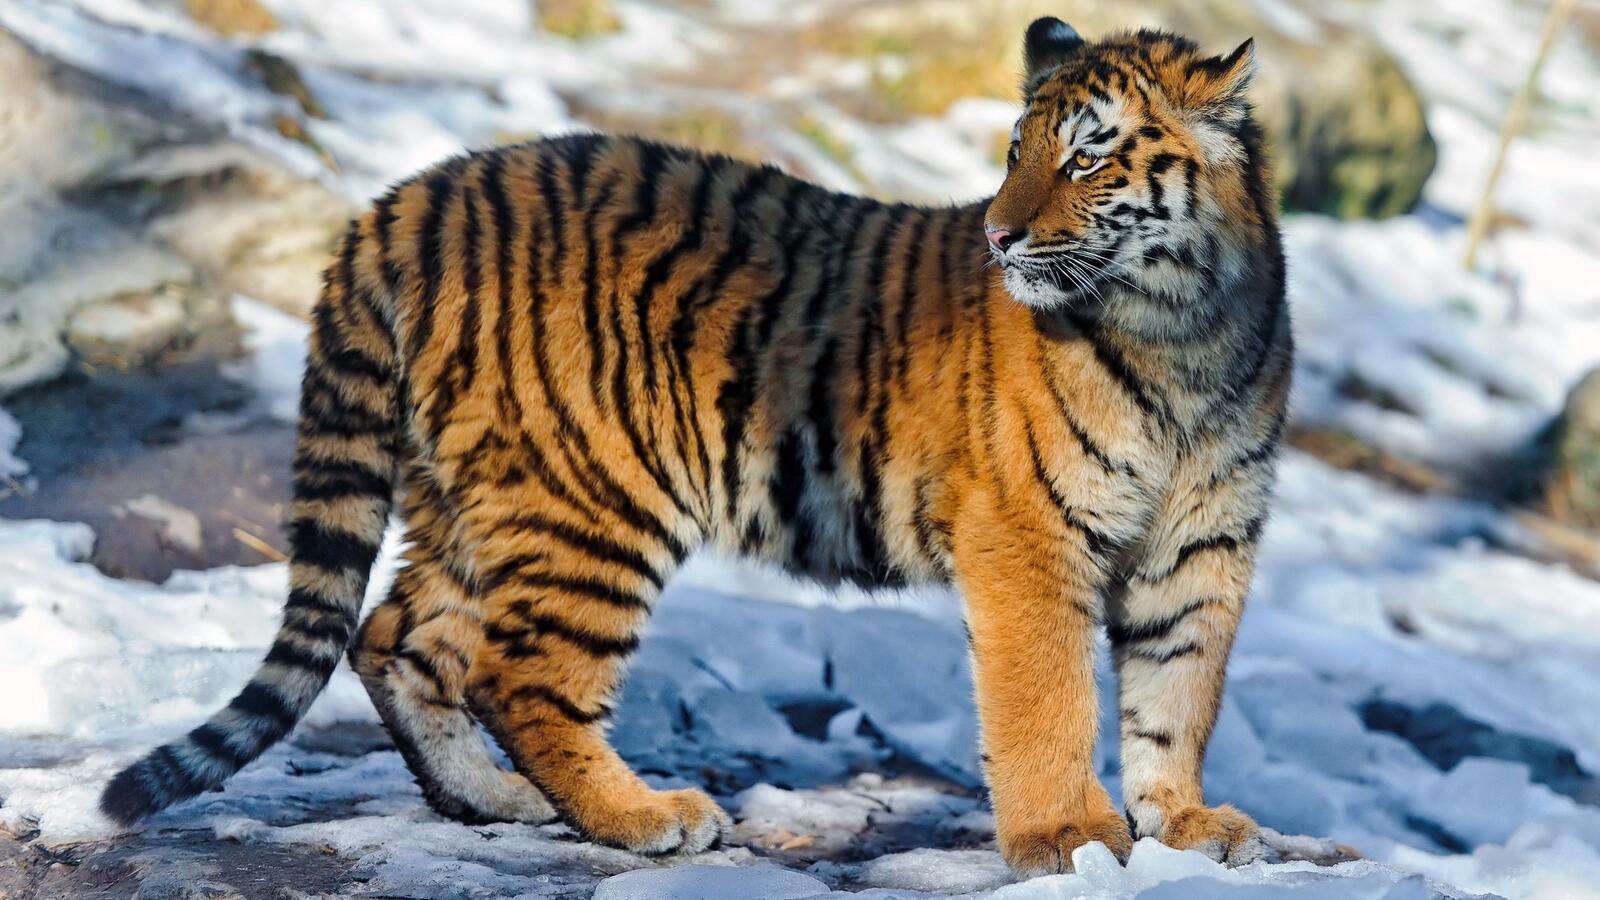 Free photo A young tiger in the winter forest